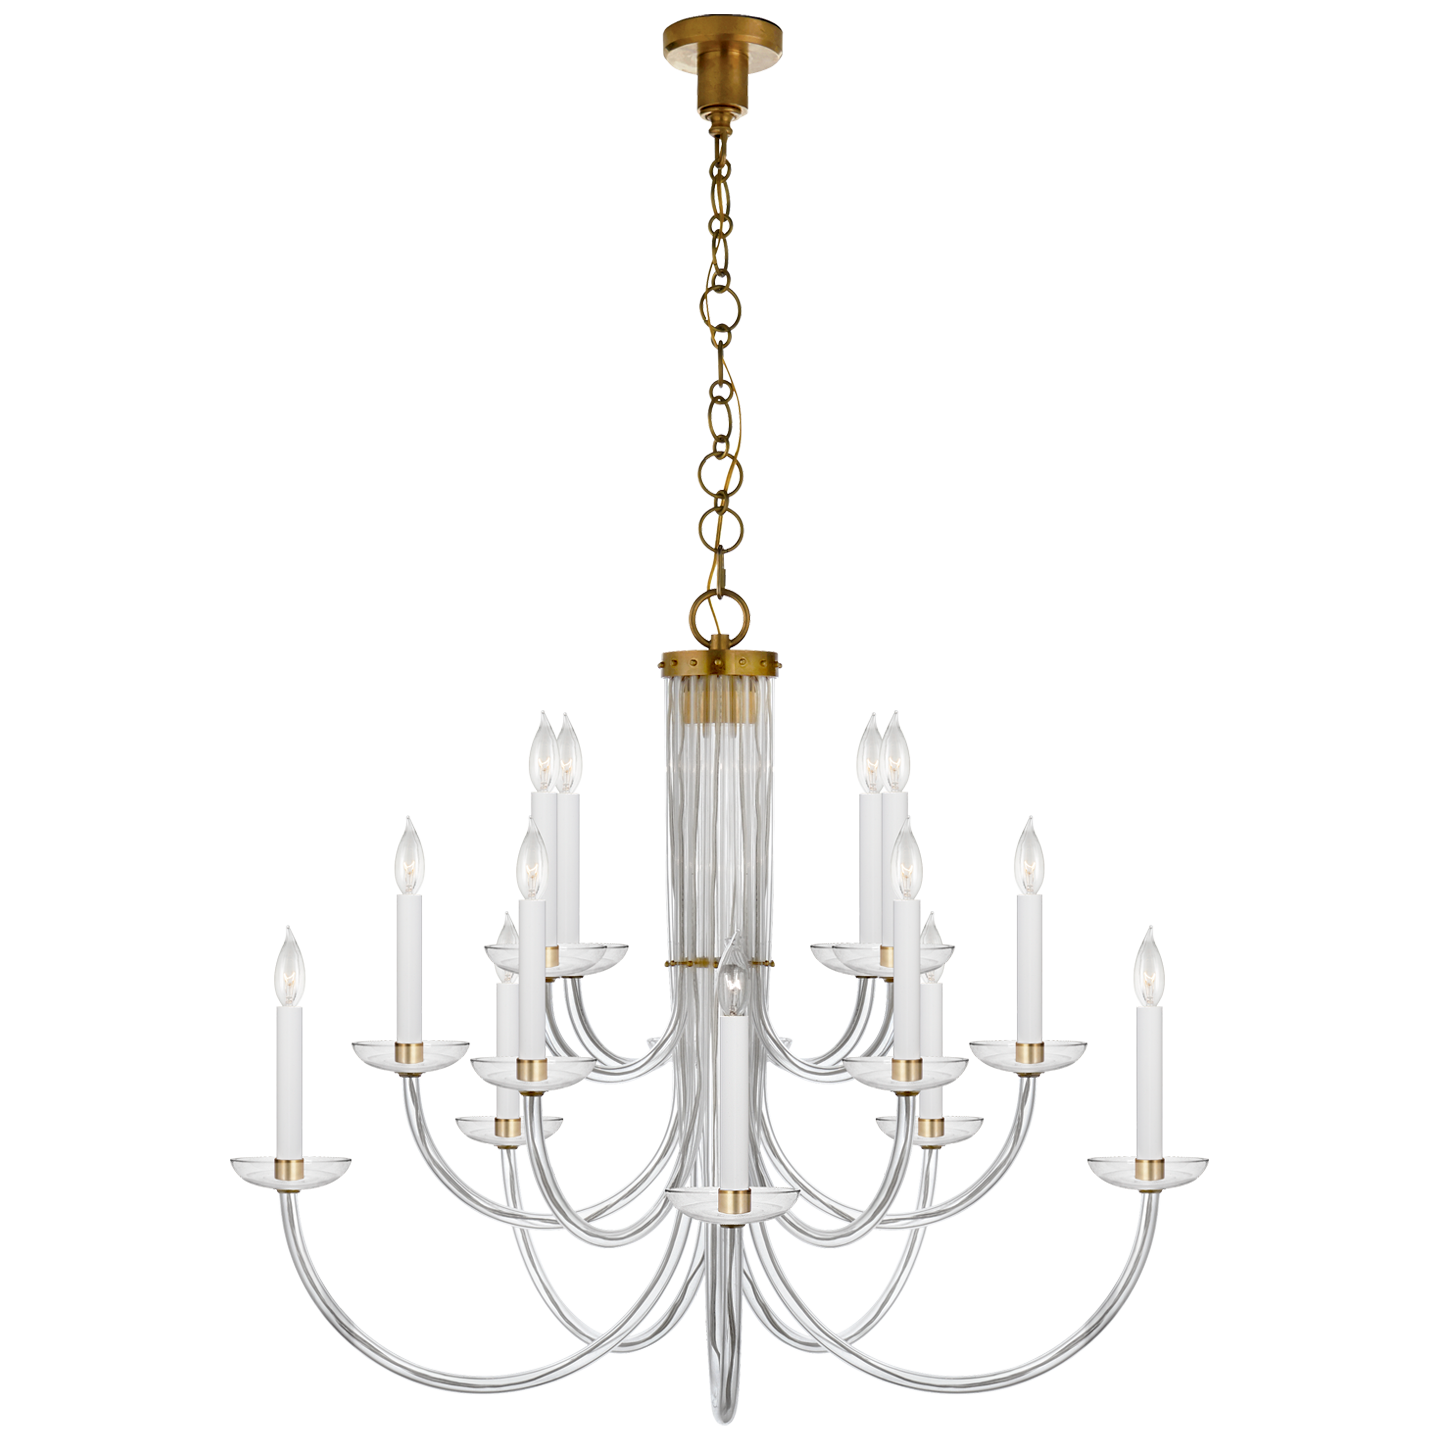 The crystal shade and slim, curved layers of this Wharton Chandelier by Visual Comfort make it an eye catcher for any living room, entry way, or other large area